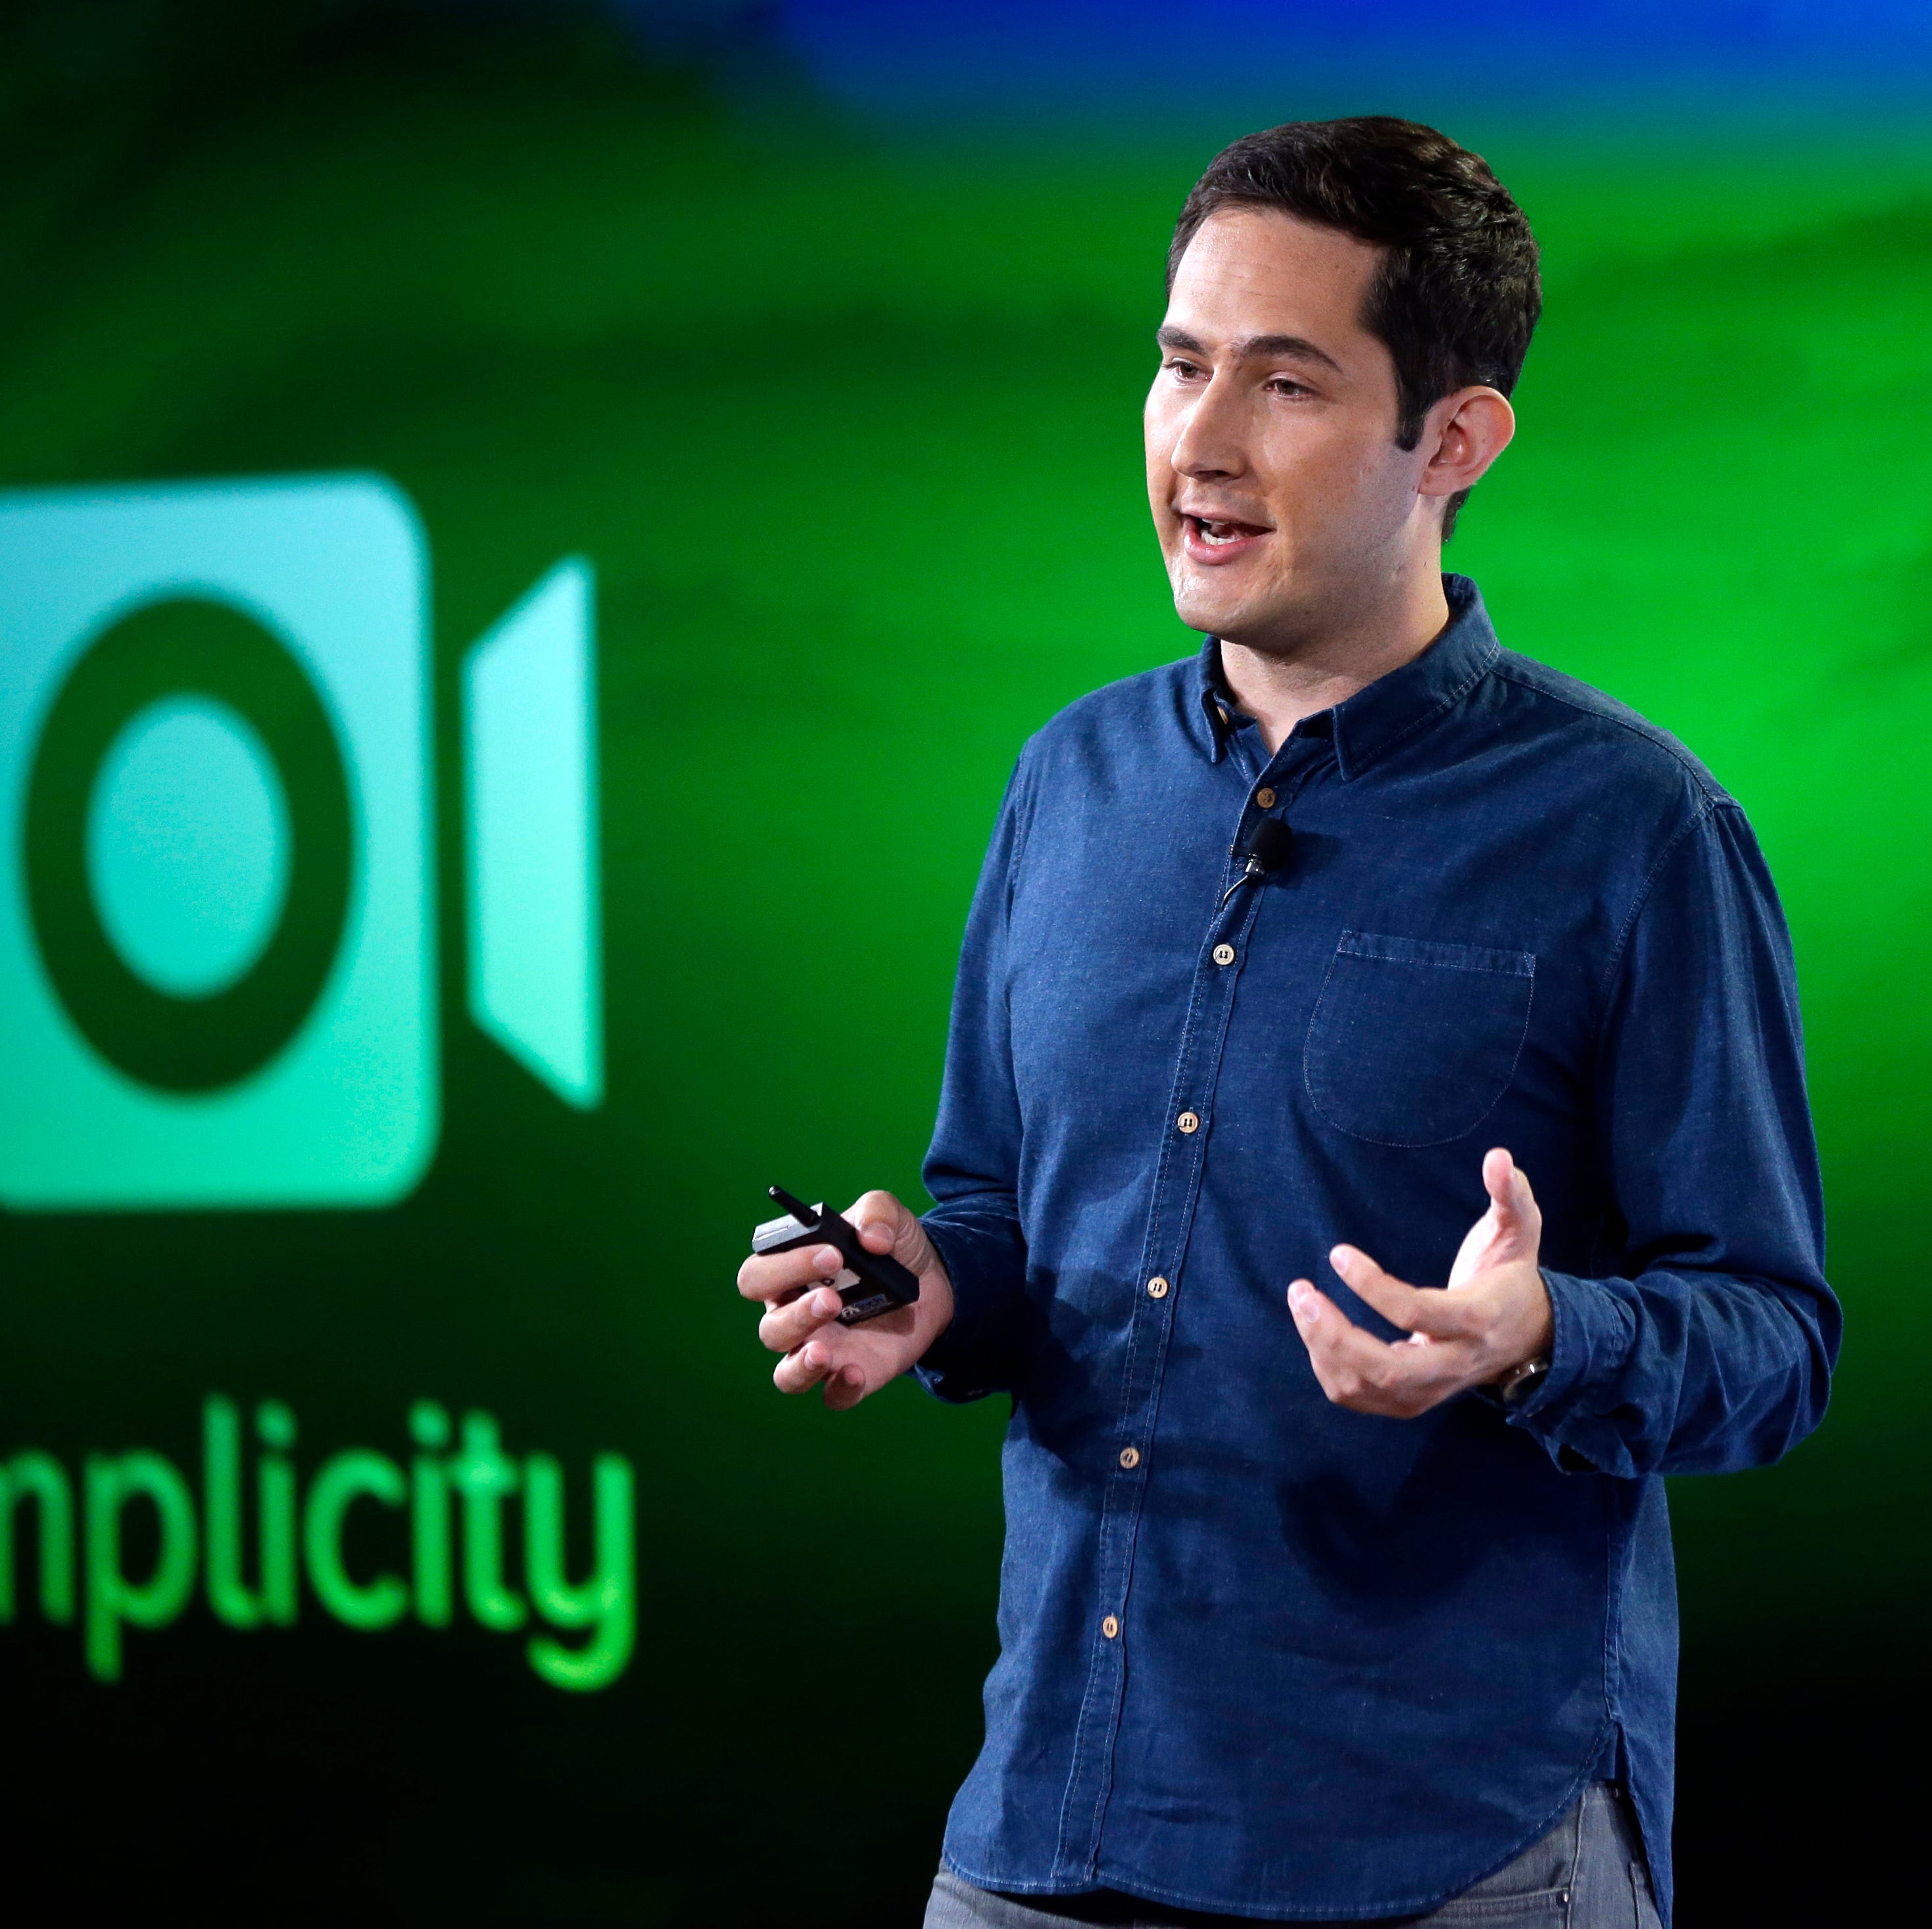 Instagram founder Kevin Systrom talks about an added video feature to the Instagram program at Facebook headquarters in Menlo Park, Calif., Thursday, June 20, 2013. (AP Photo/Marcio Jose Sanchez) ORG XMIT: CAMS108